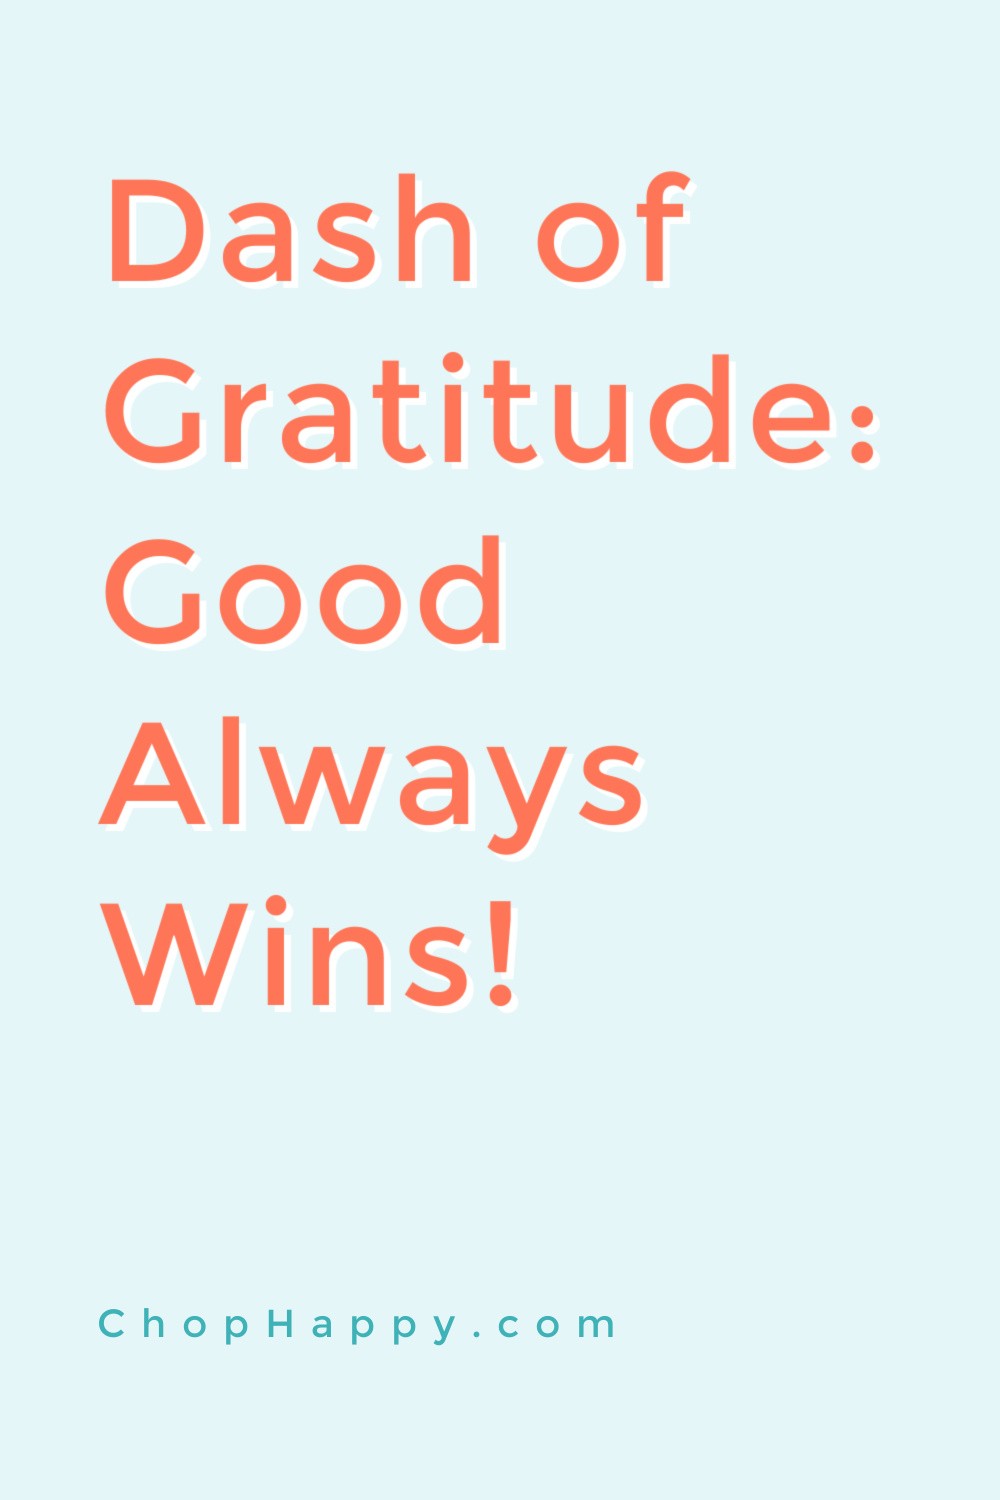 Dash of Gratitude: Good Always Wins! Inspiirational quotes to help you live your dreams. Dream big, live in the now, and believe in yourself. Happy Today! www.ChopHappy.com #gratitude #motivationalvideos